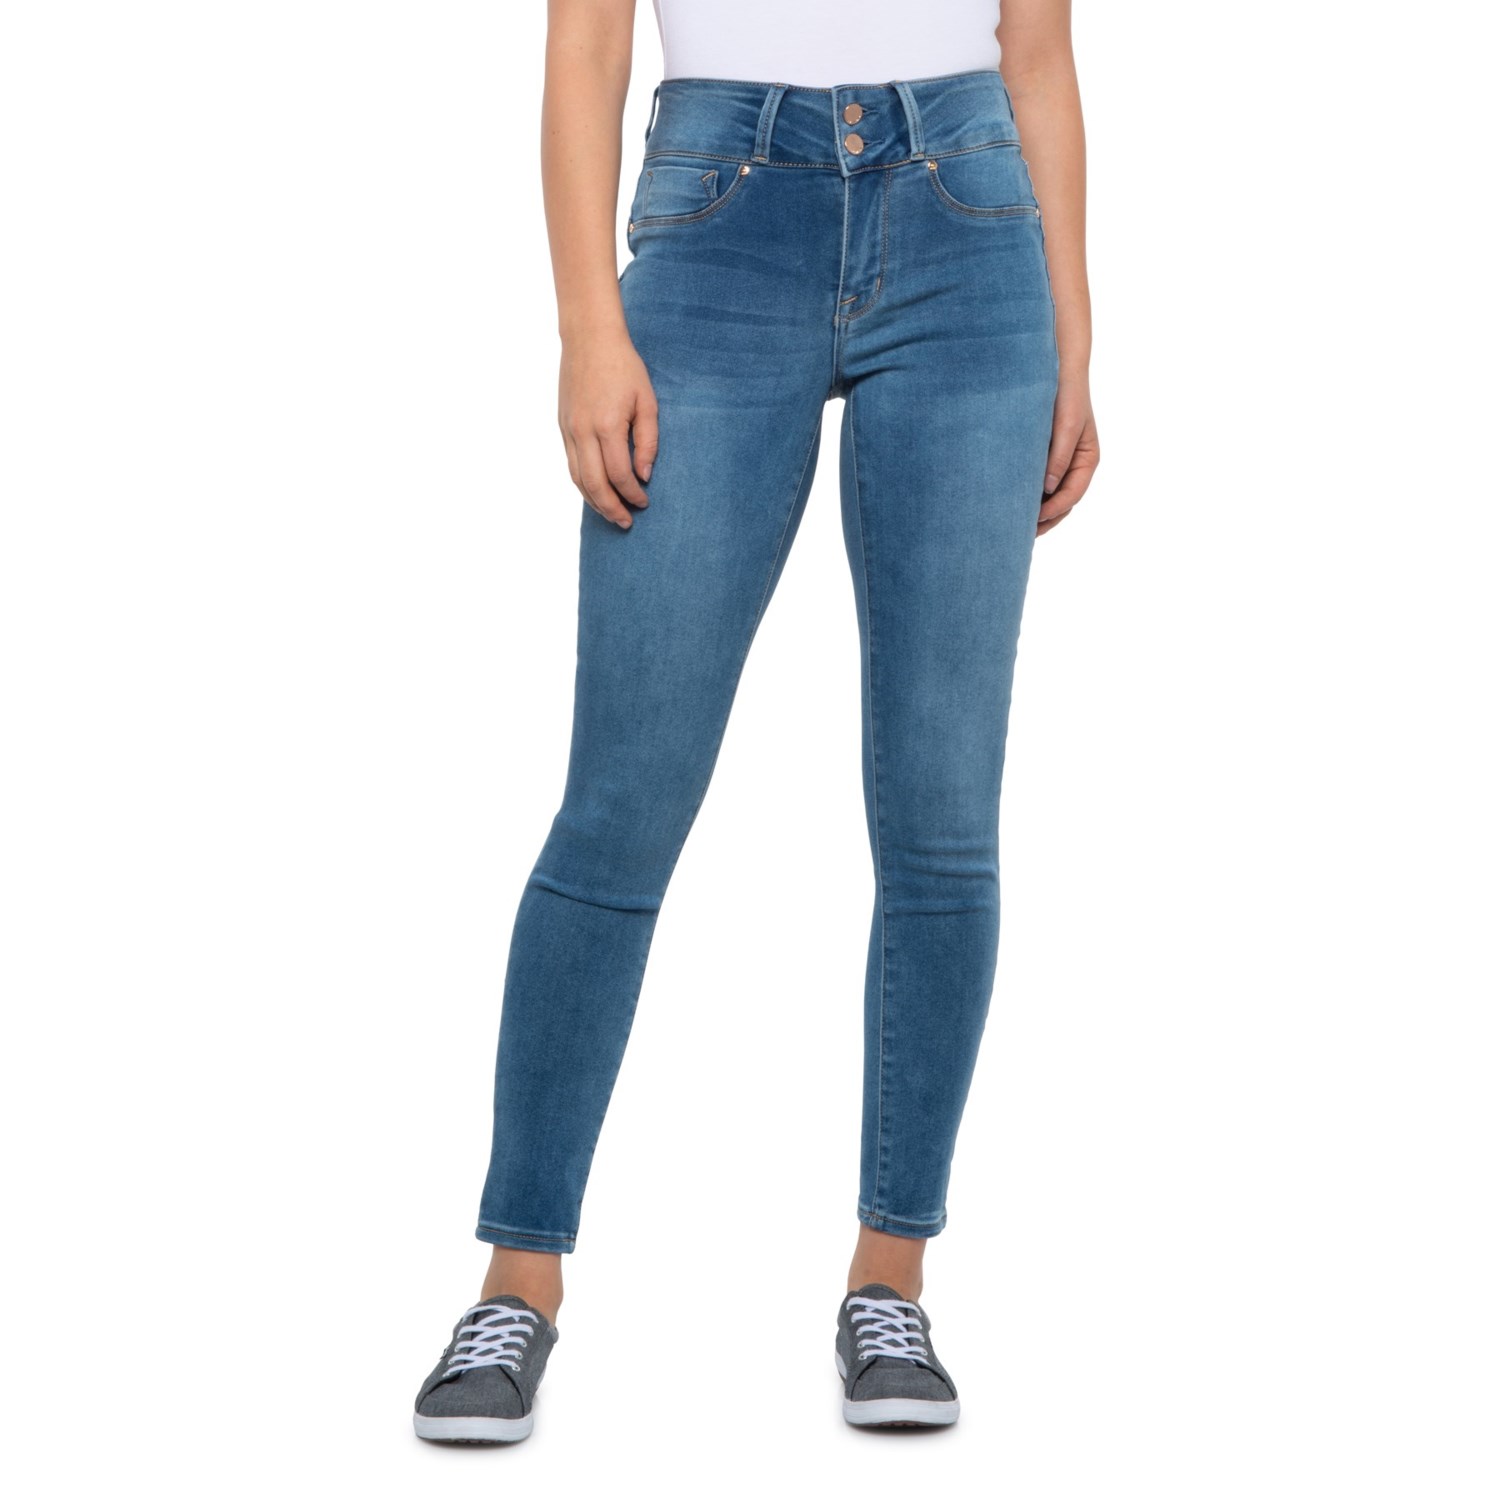 Seven7 Curvy High-Rise Jeggings (For Women) - Save 41%